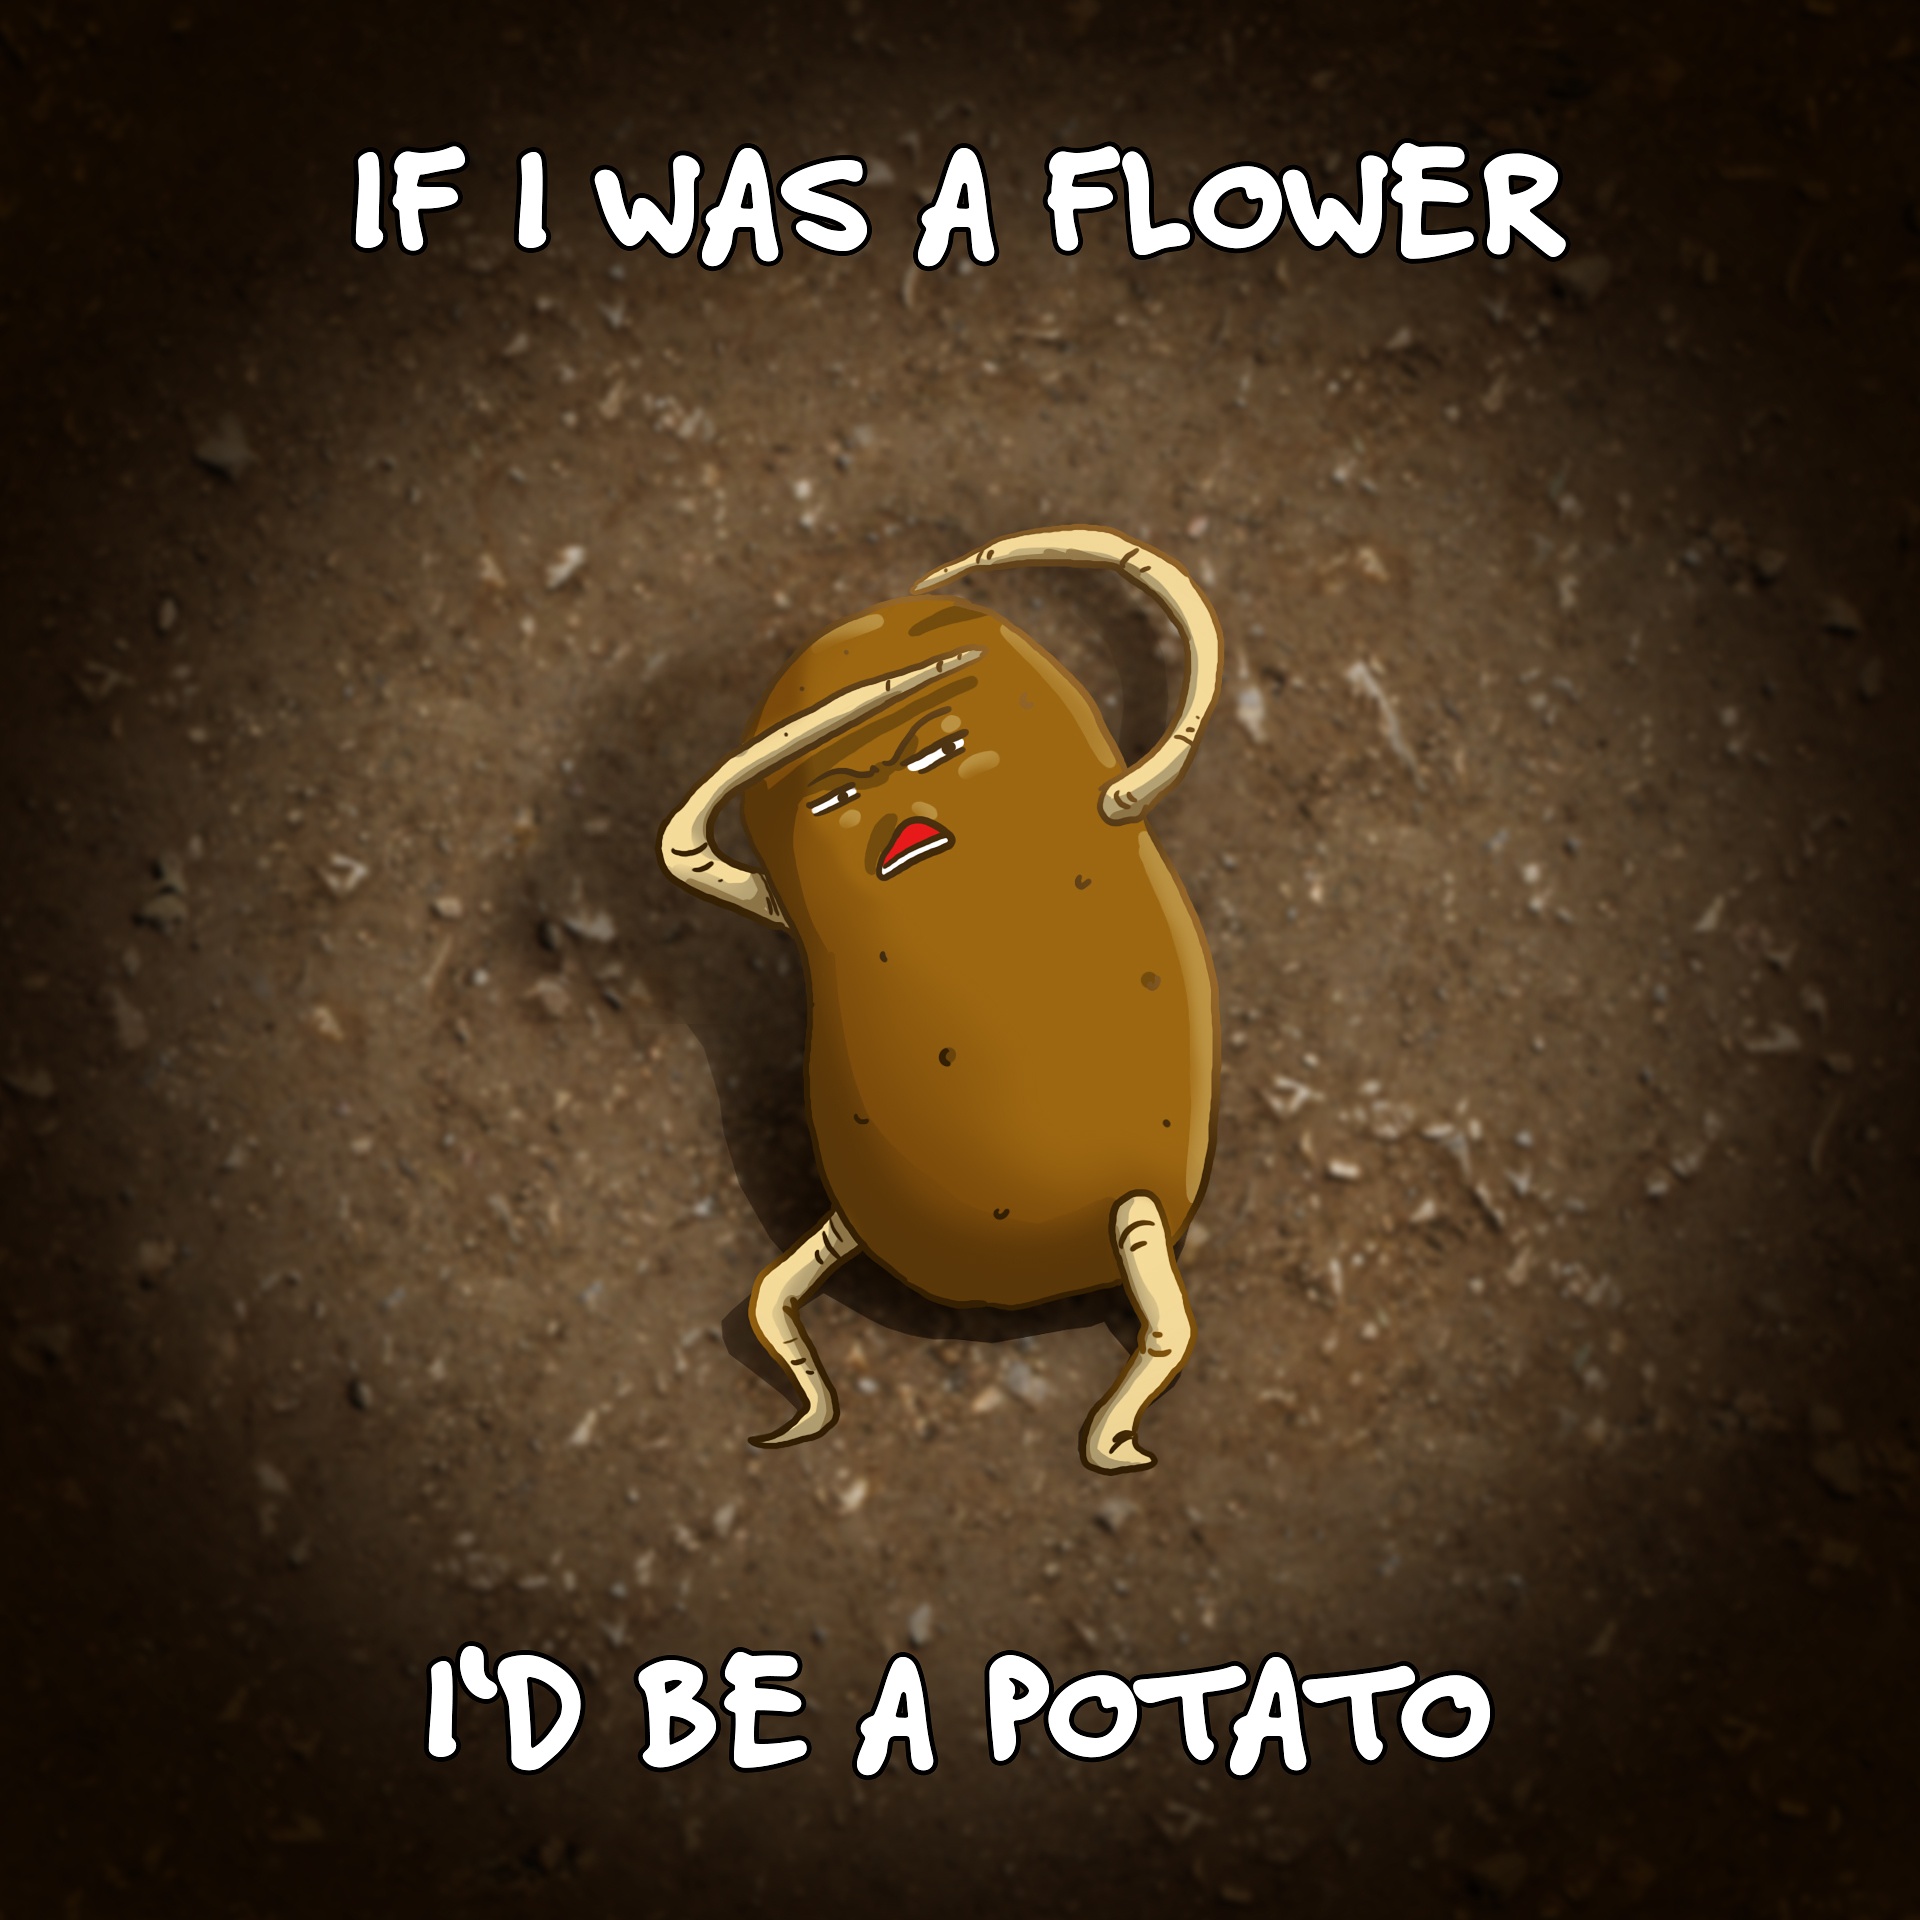 If I was a flower…